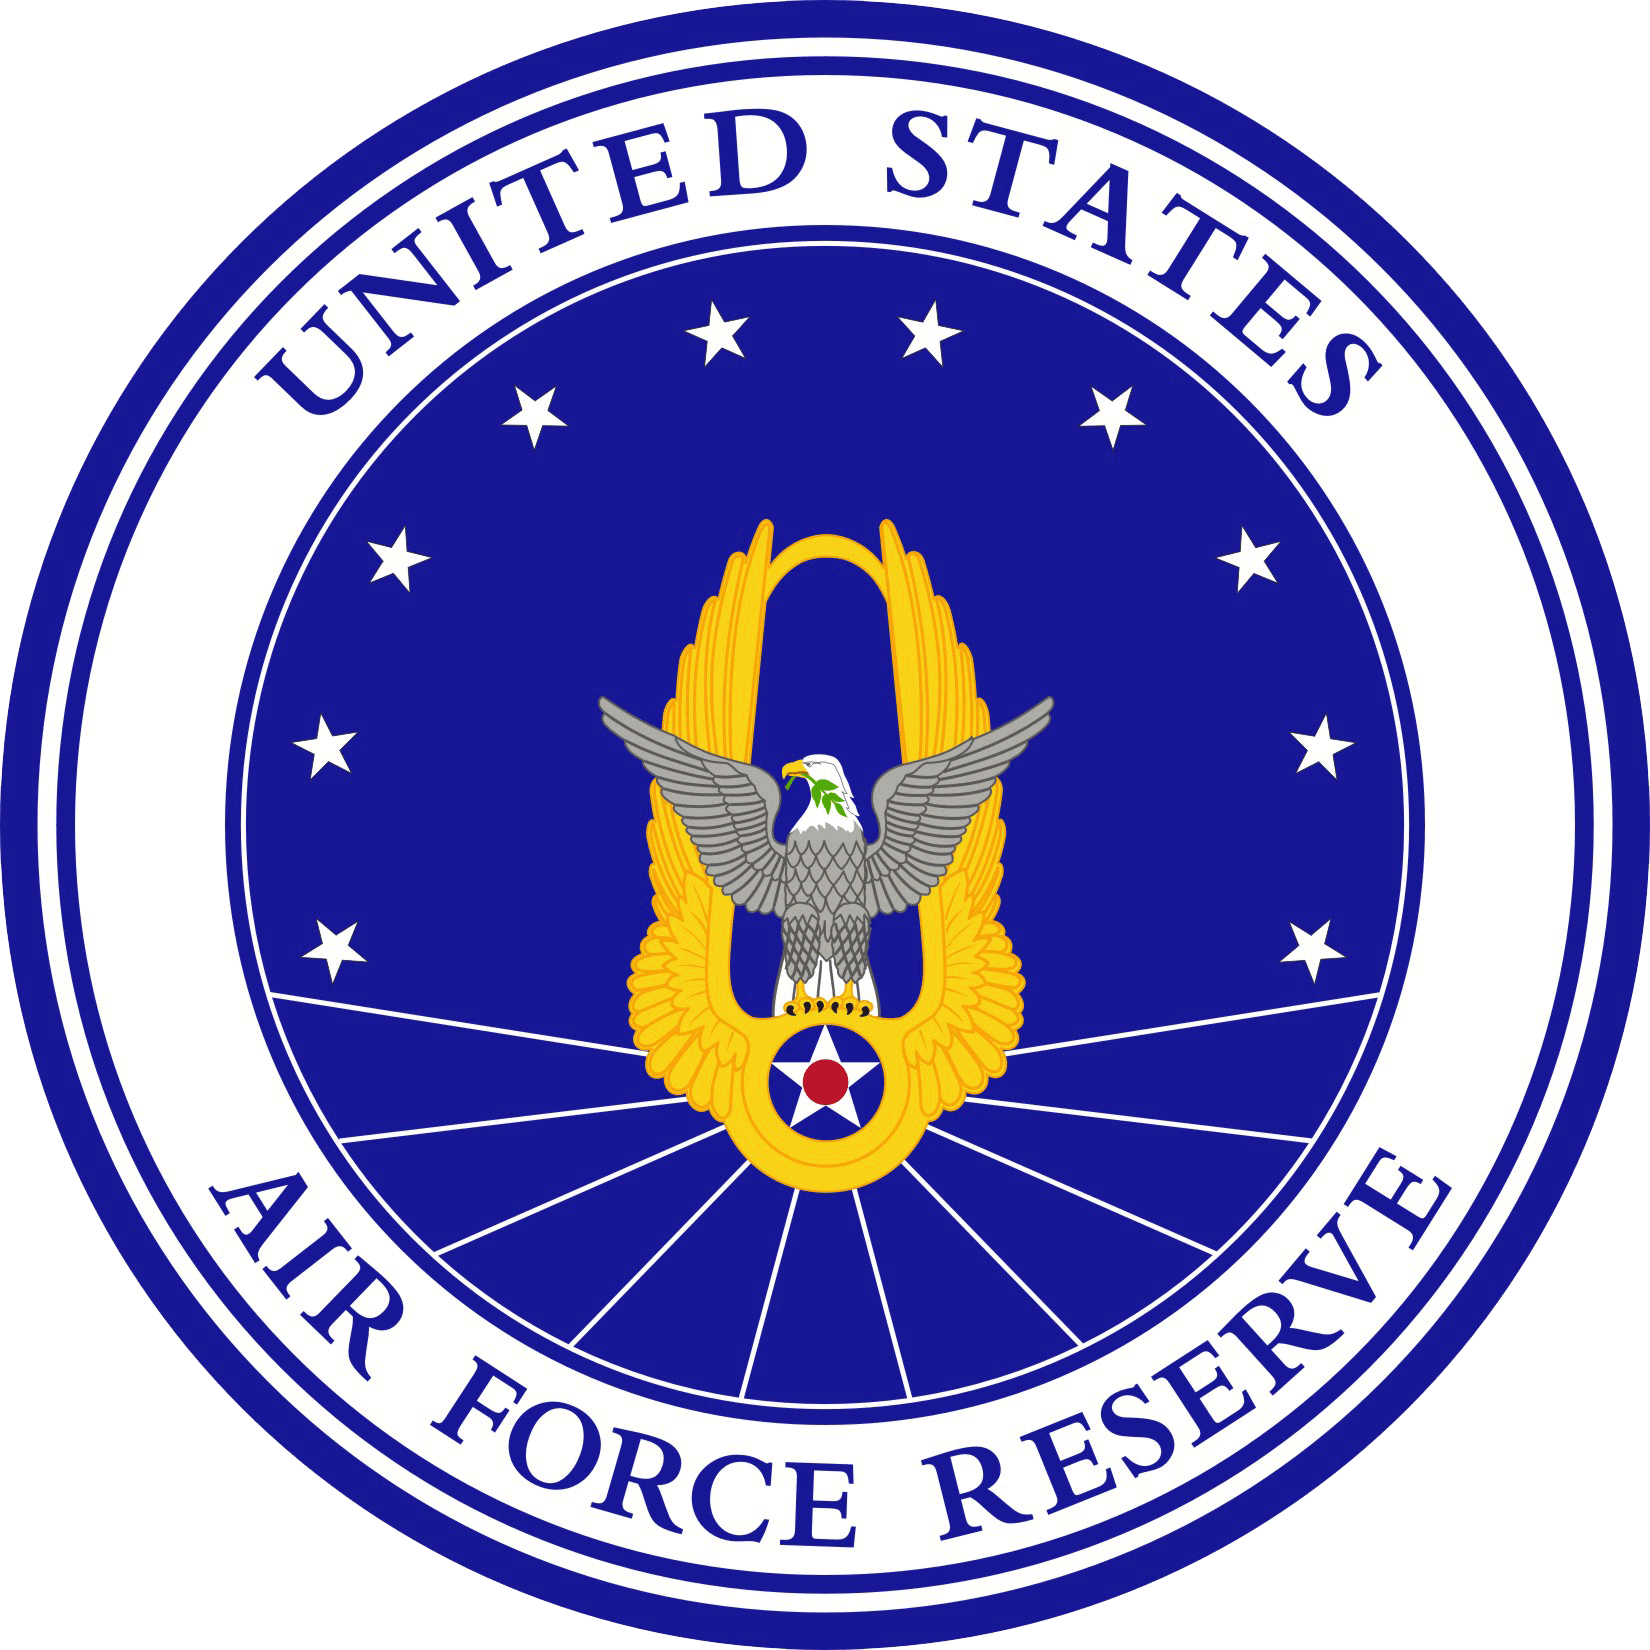 Service air force reserve. Military clipart navy seals